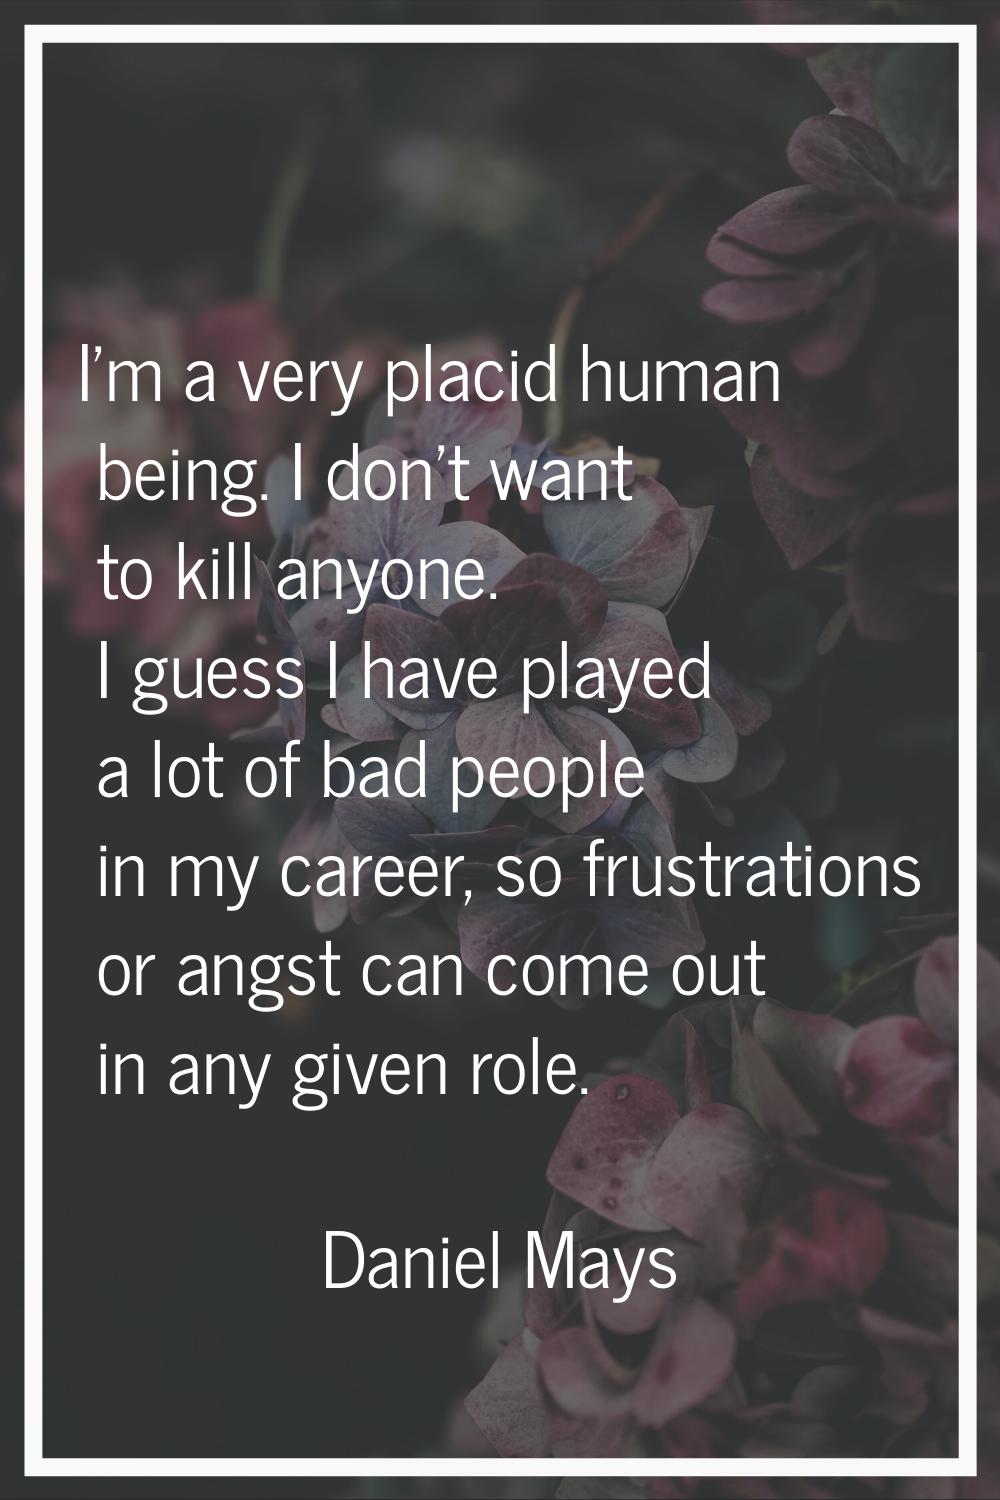 I'm a very placid human being. I don't want to kill anyone. I guess I have played a lot of bad peop